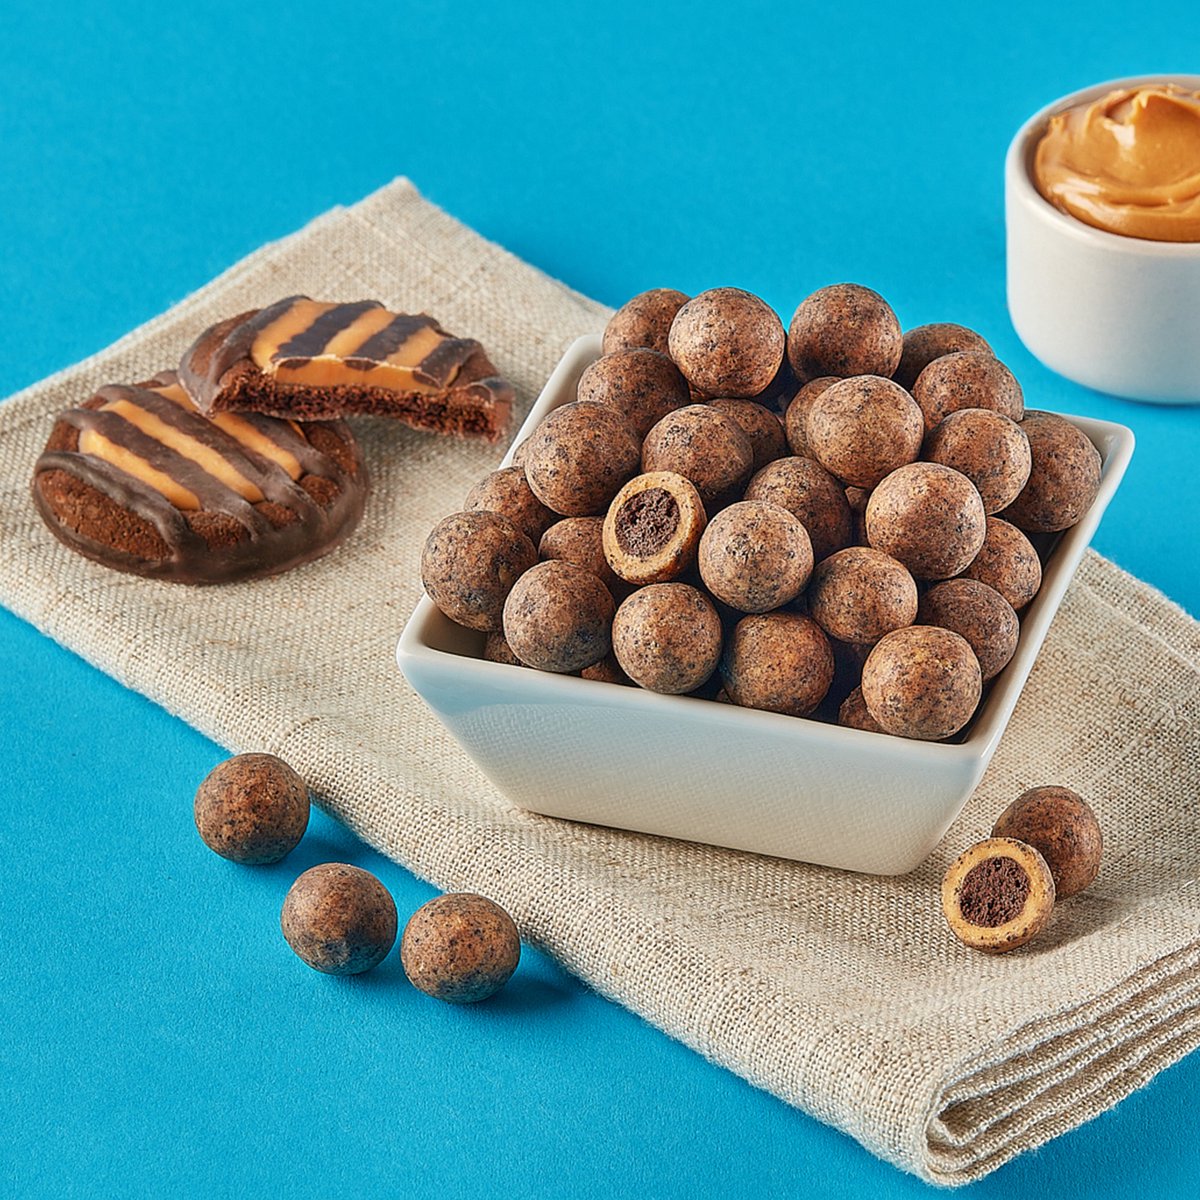 Have you had a chance to try the new SKIPPY® P.B. Bites in Girl Scout Cookie™ inspired flavors? Each Girl Scout Cookie™ inspired flavor variety features a crunchy center with a soft, non-sticky peanut butter coating for easy on-the-go snacking